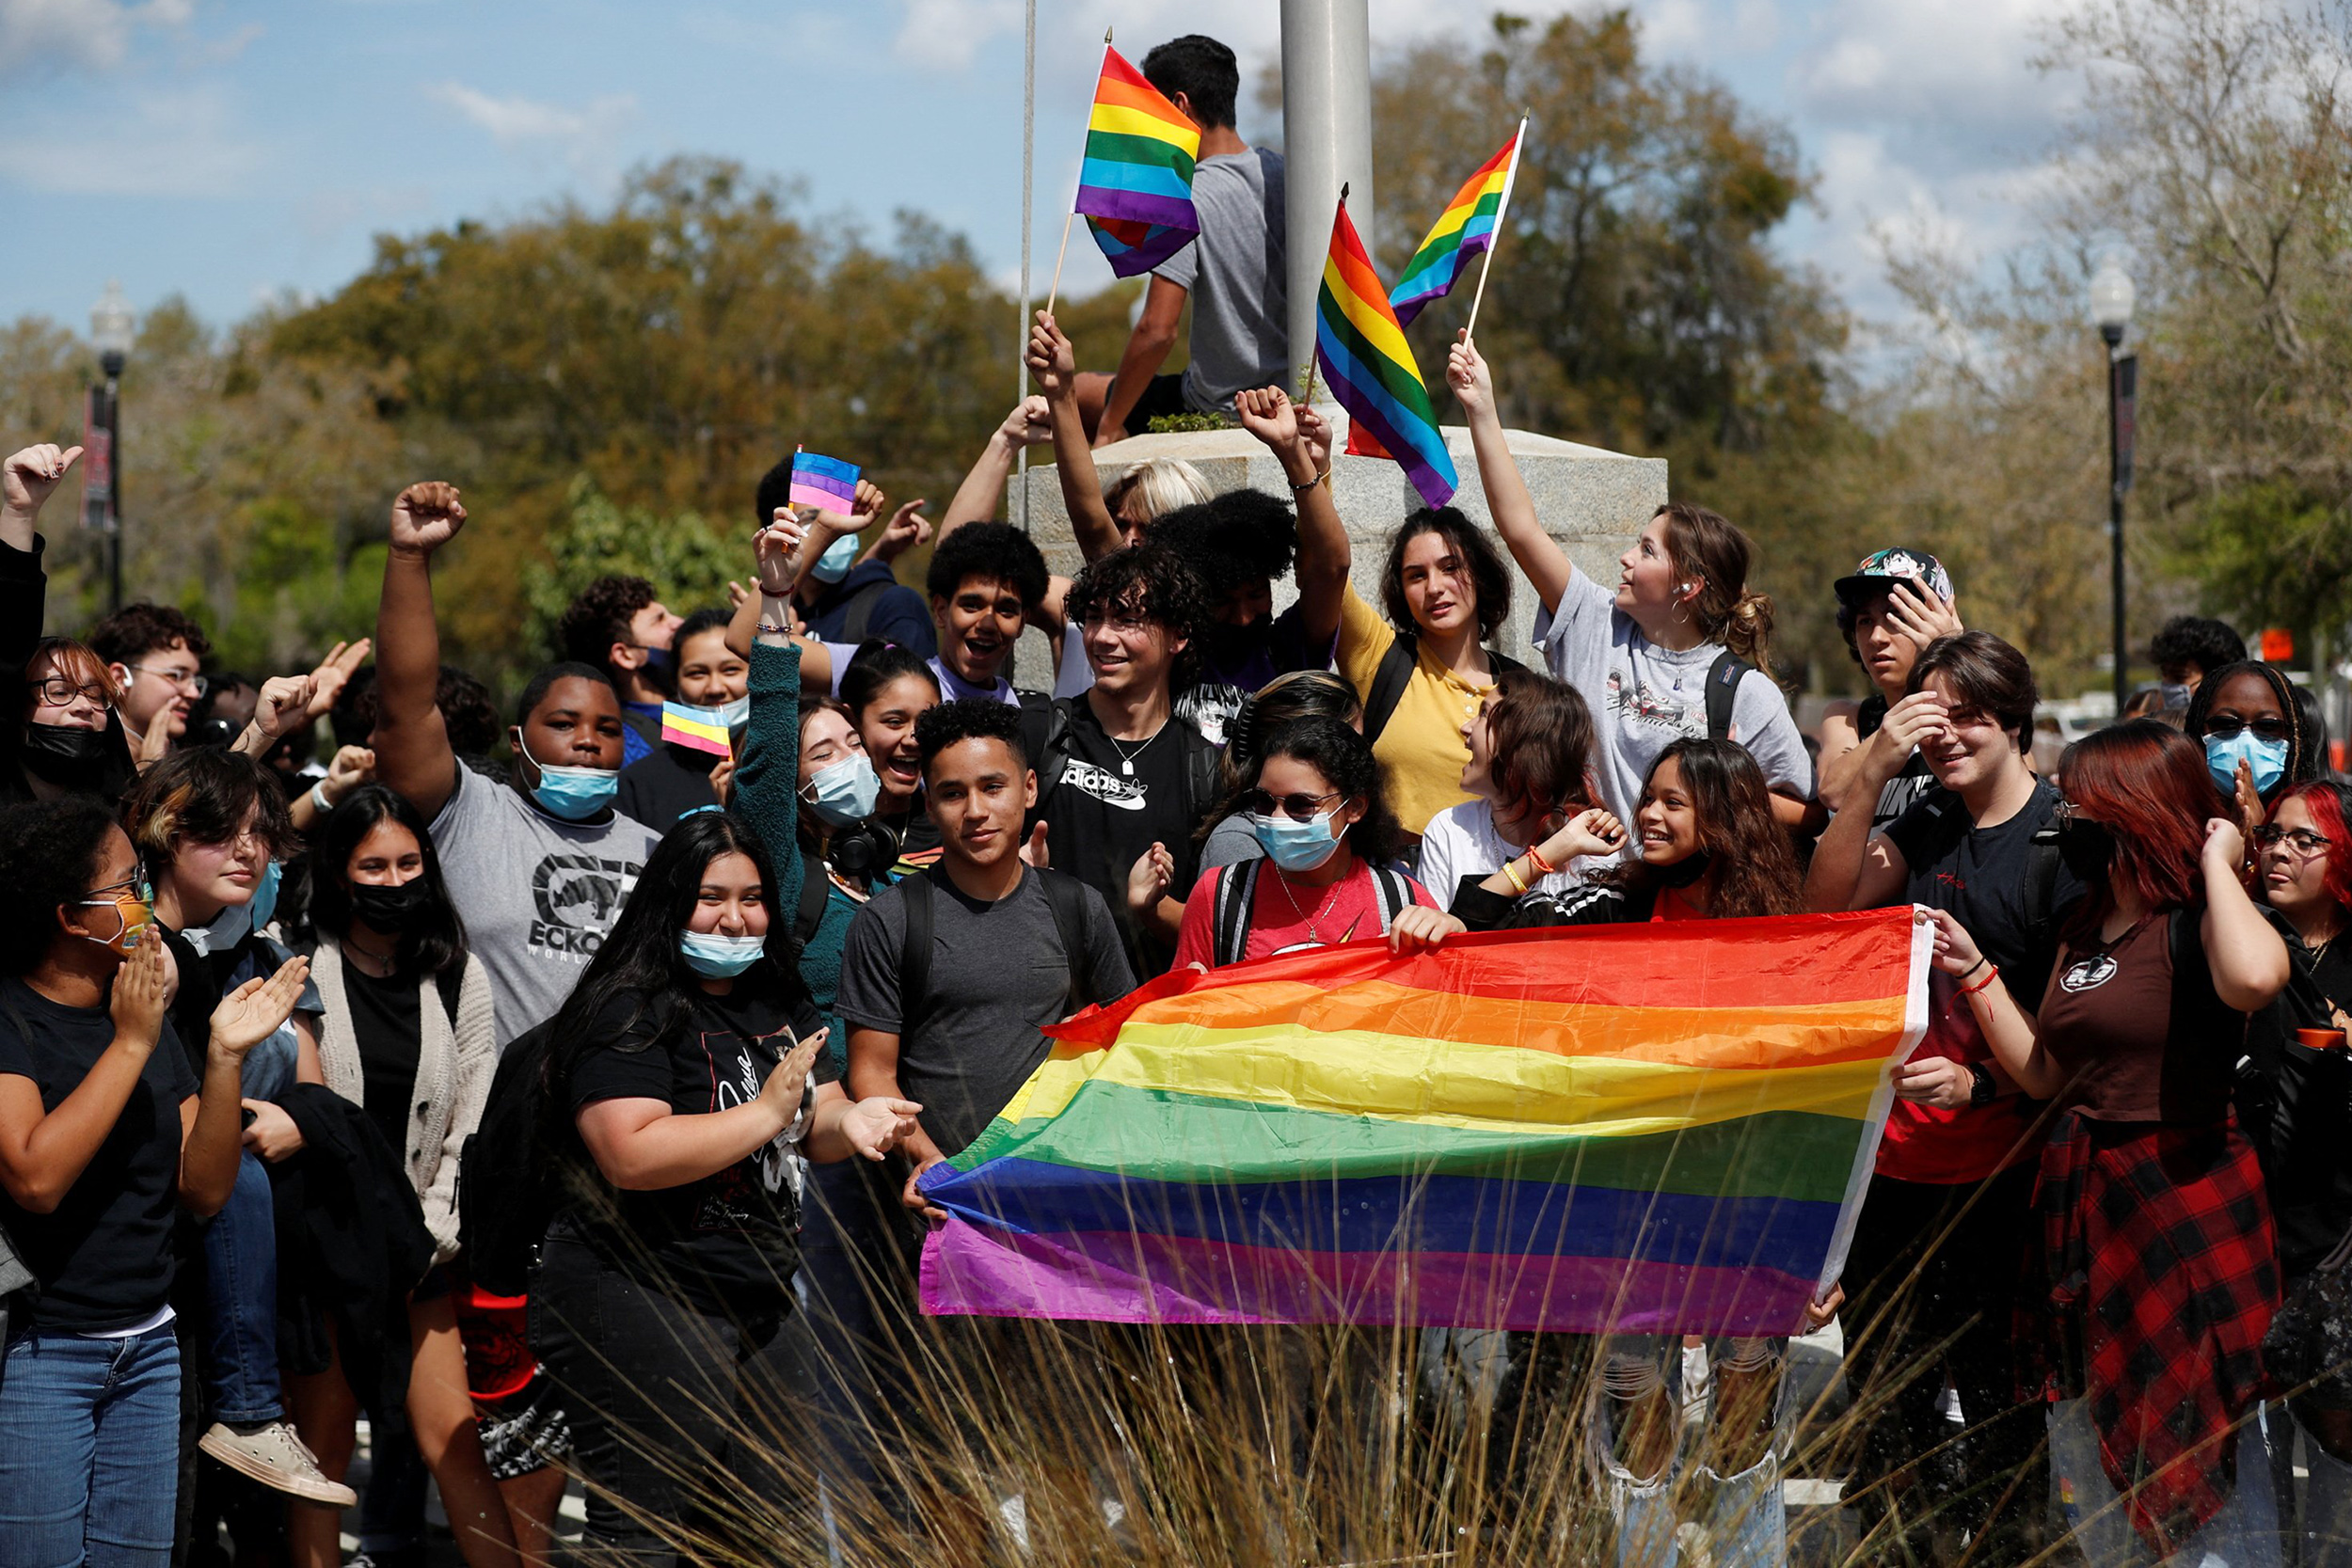 Students Throughout Florida Are Staging Walkouts In Protest Of The State’s “Don’t Say Gay” Bill